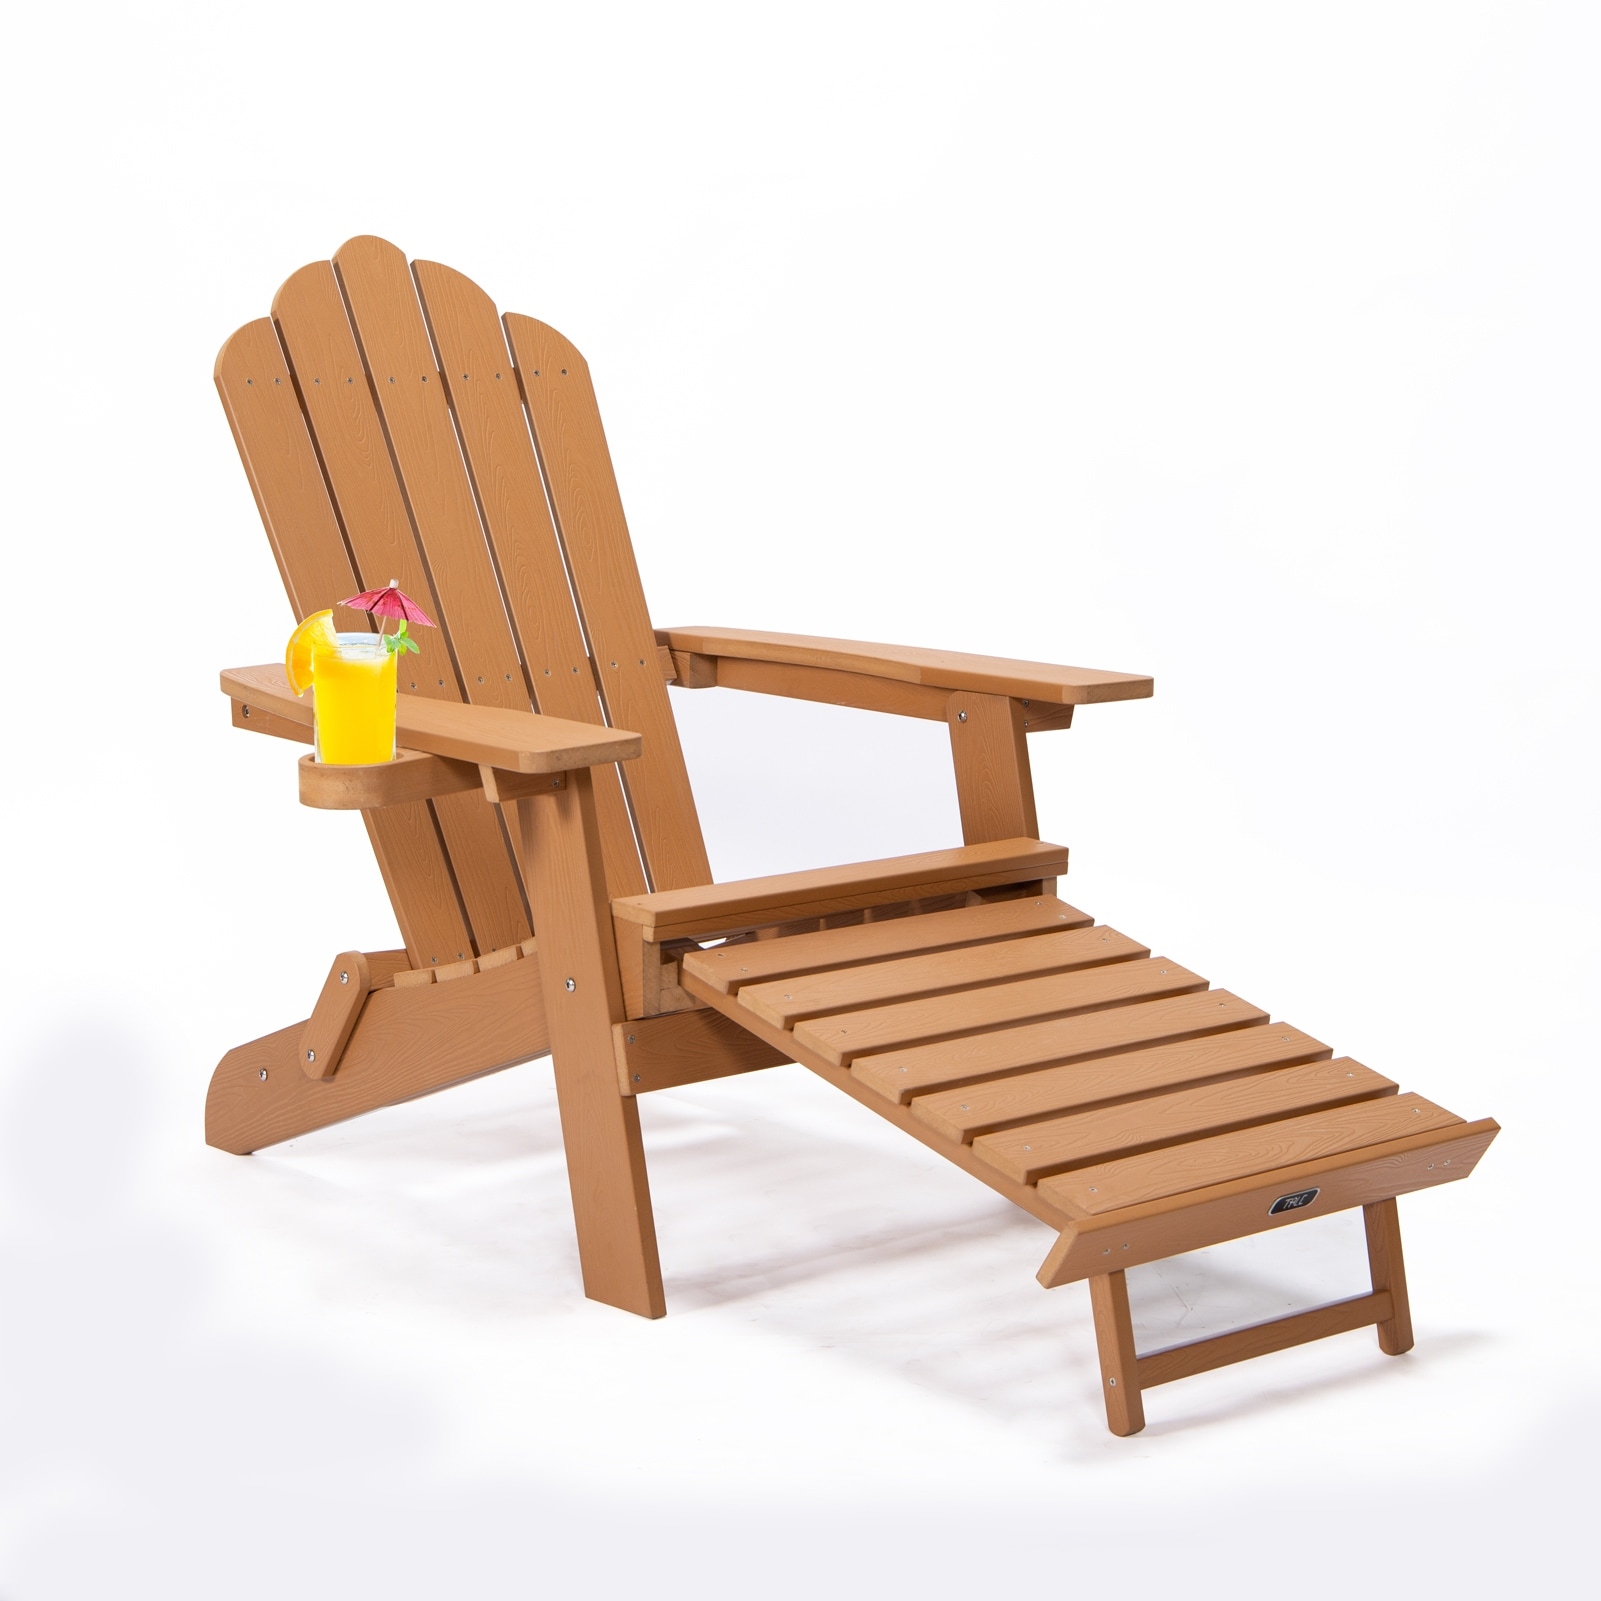 Adirondack Chair With Cup Holder And Retractable Footrest For Outdoor Patio Garden Furniture  Ergonomic Fanback and Folding Design